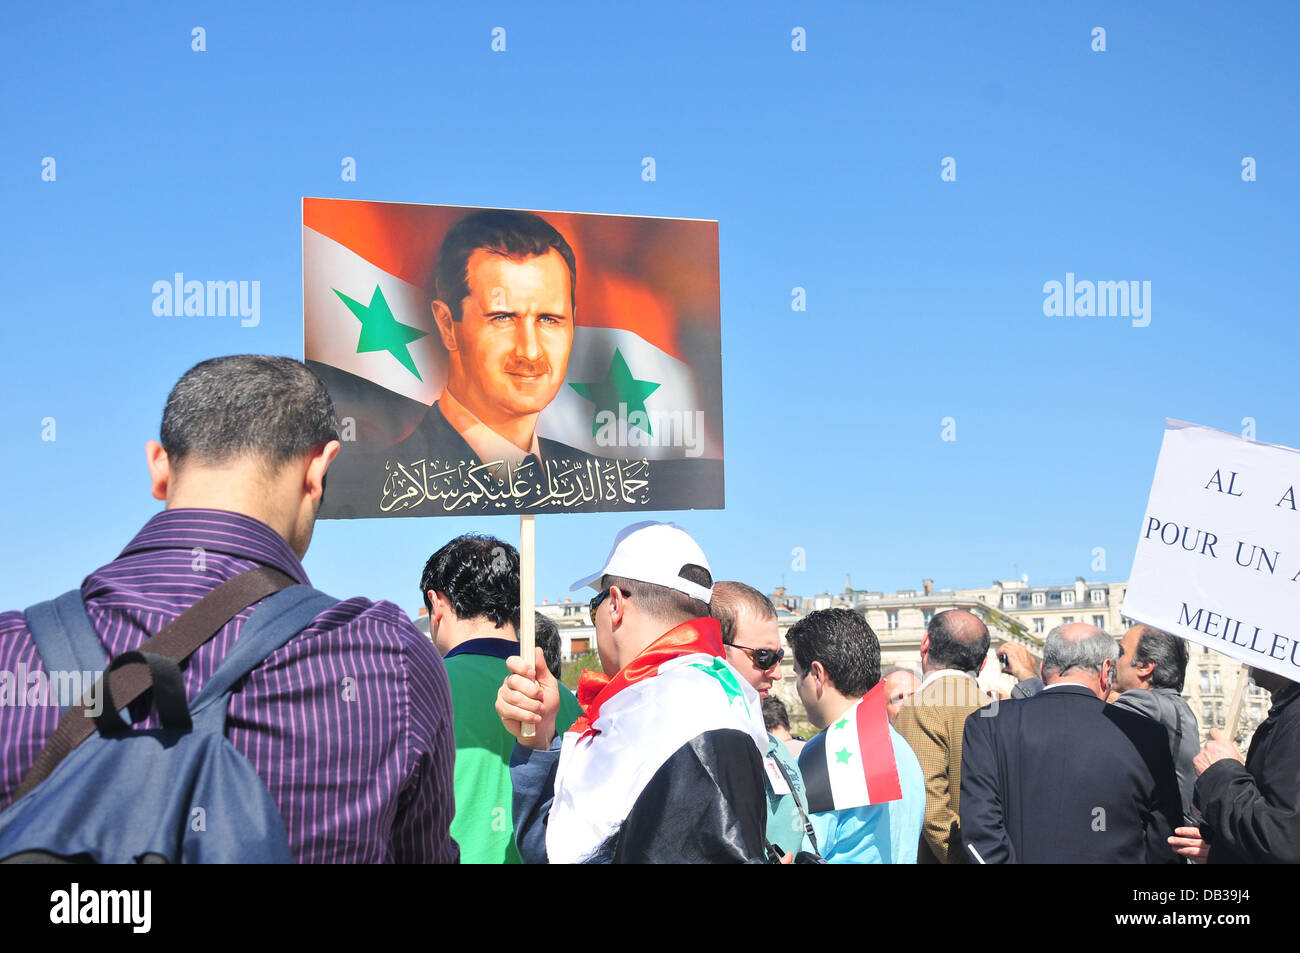 Supporters of Syrian president Bachar al-Assad demonstrate near the Eiffel Tower, Paris, on April 9, 2011. Protestors in Syria Stock Photo